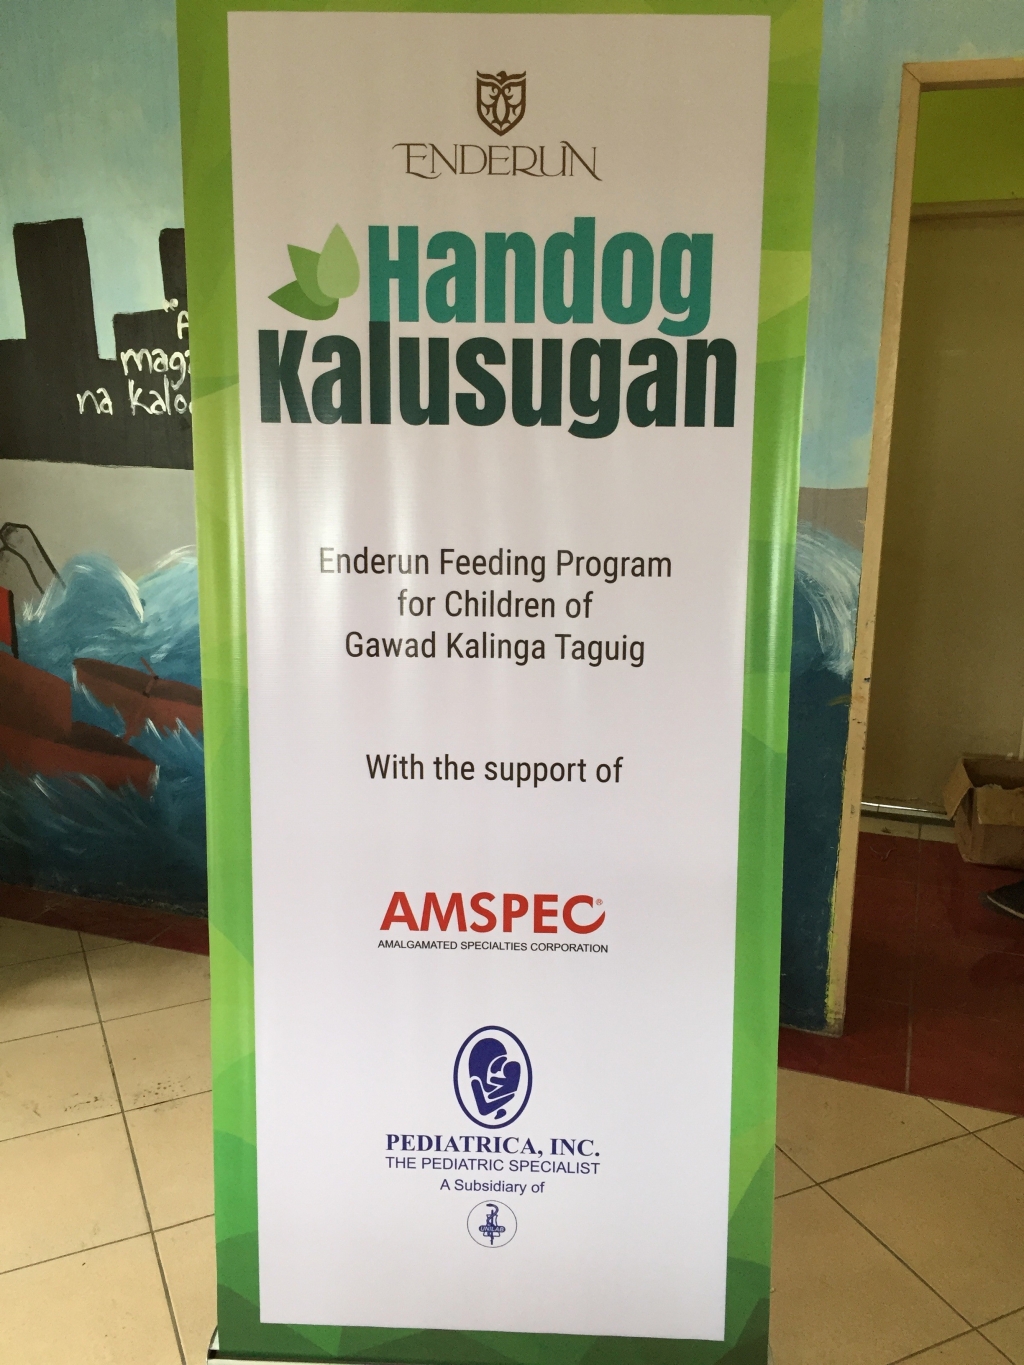 Handog Kalusugan, a feeding program led by Enderun Colleges with the support of Amalgamated Specialties Corporation and Pediatrica, Inc. 